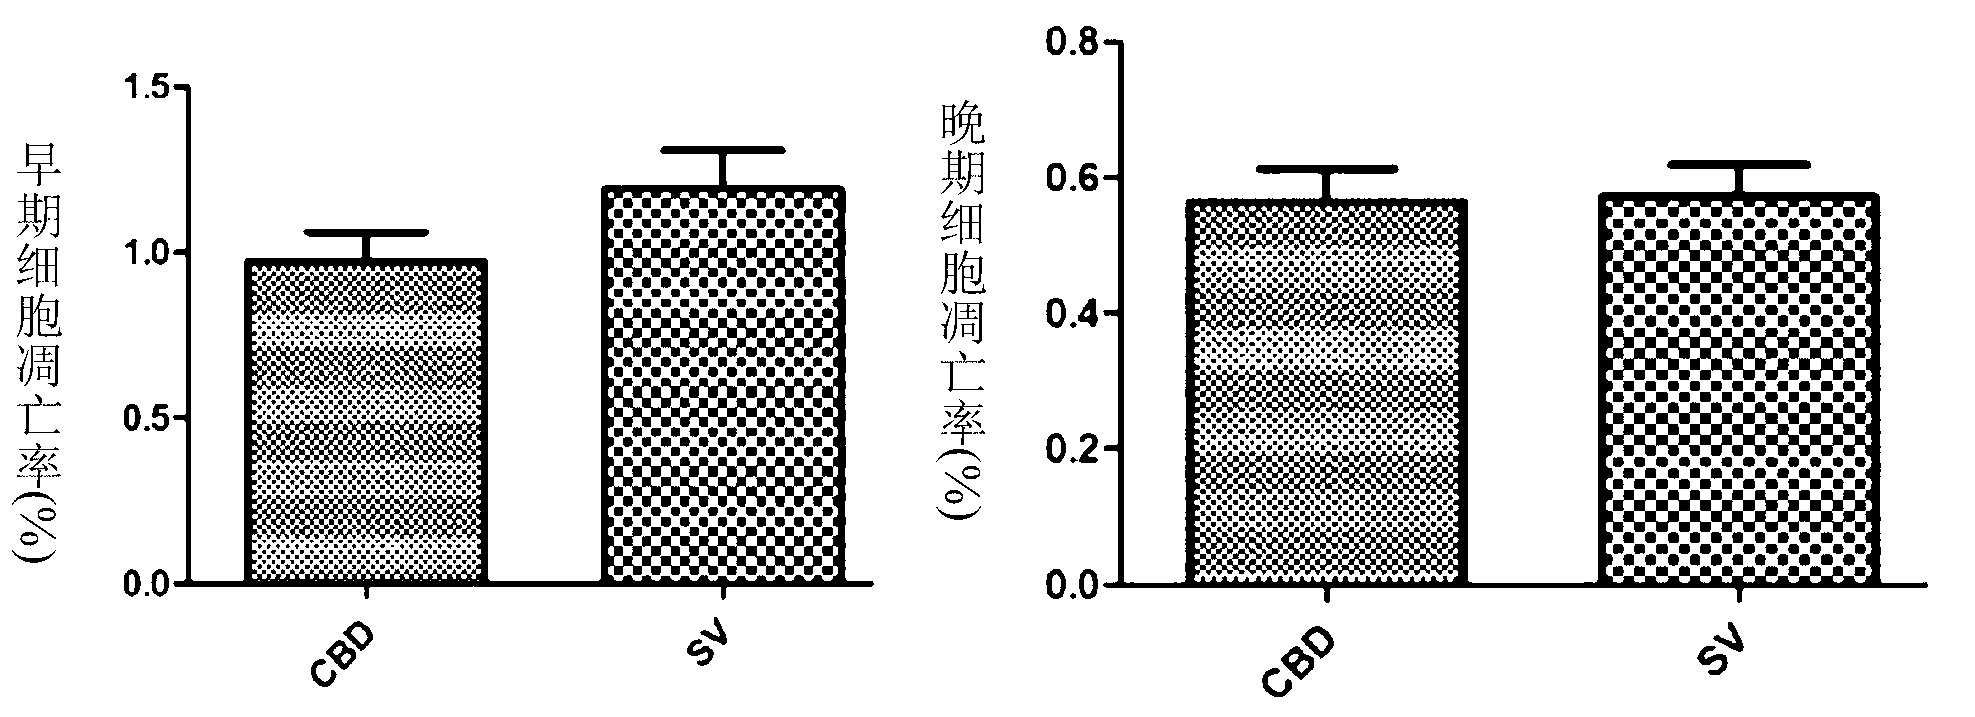 Separation and purification method for islet cells of mouse